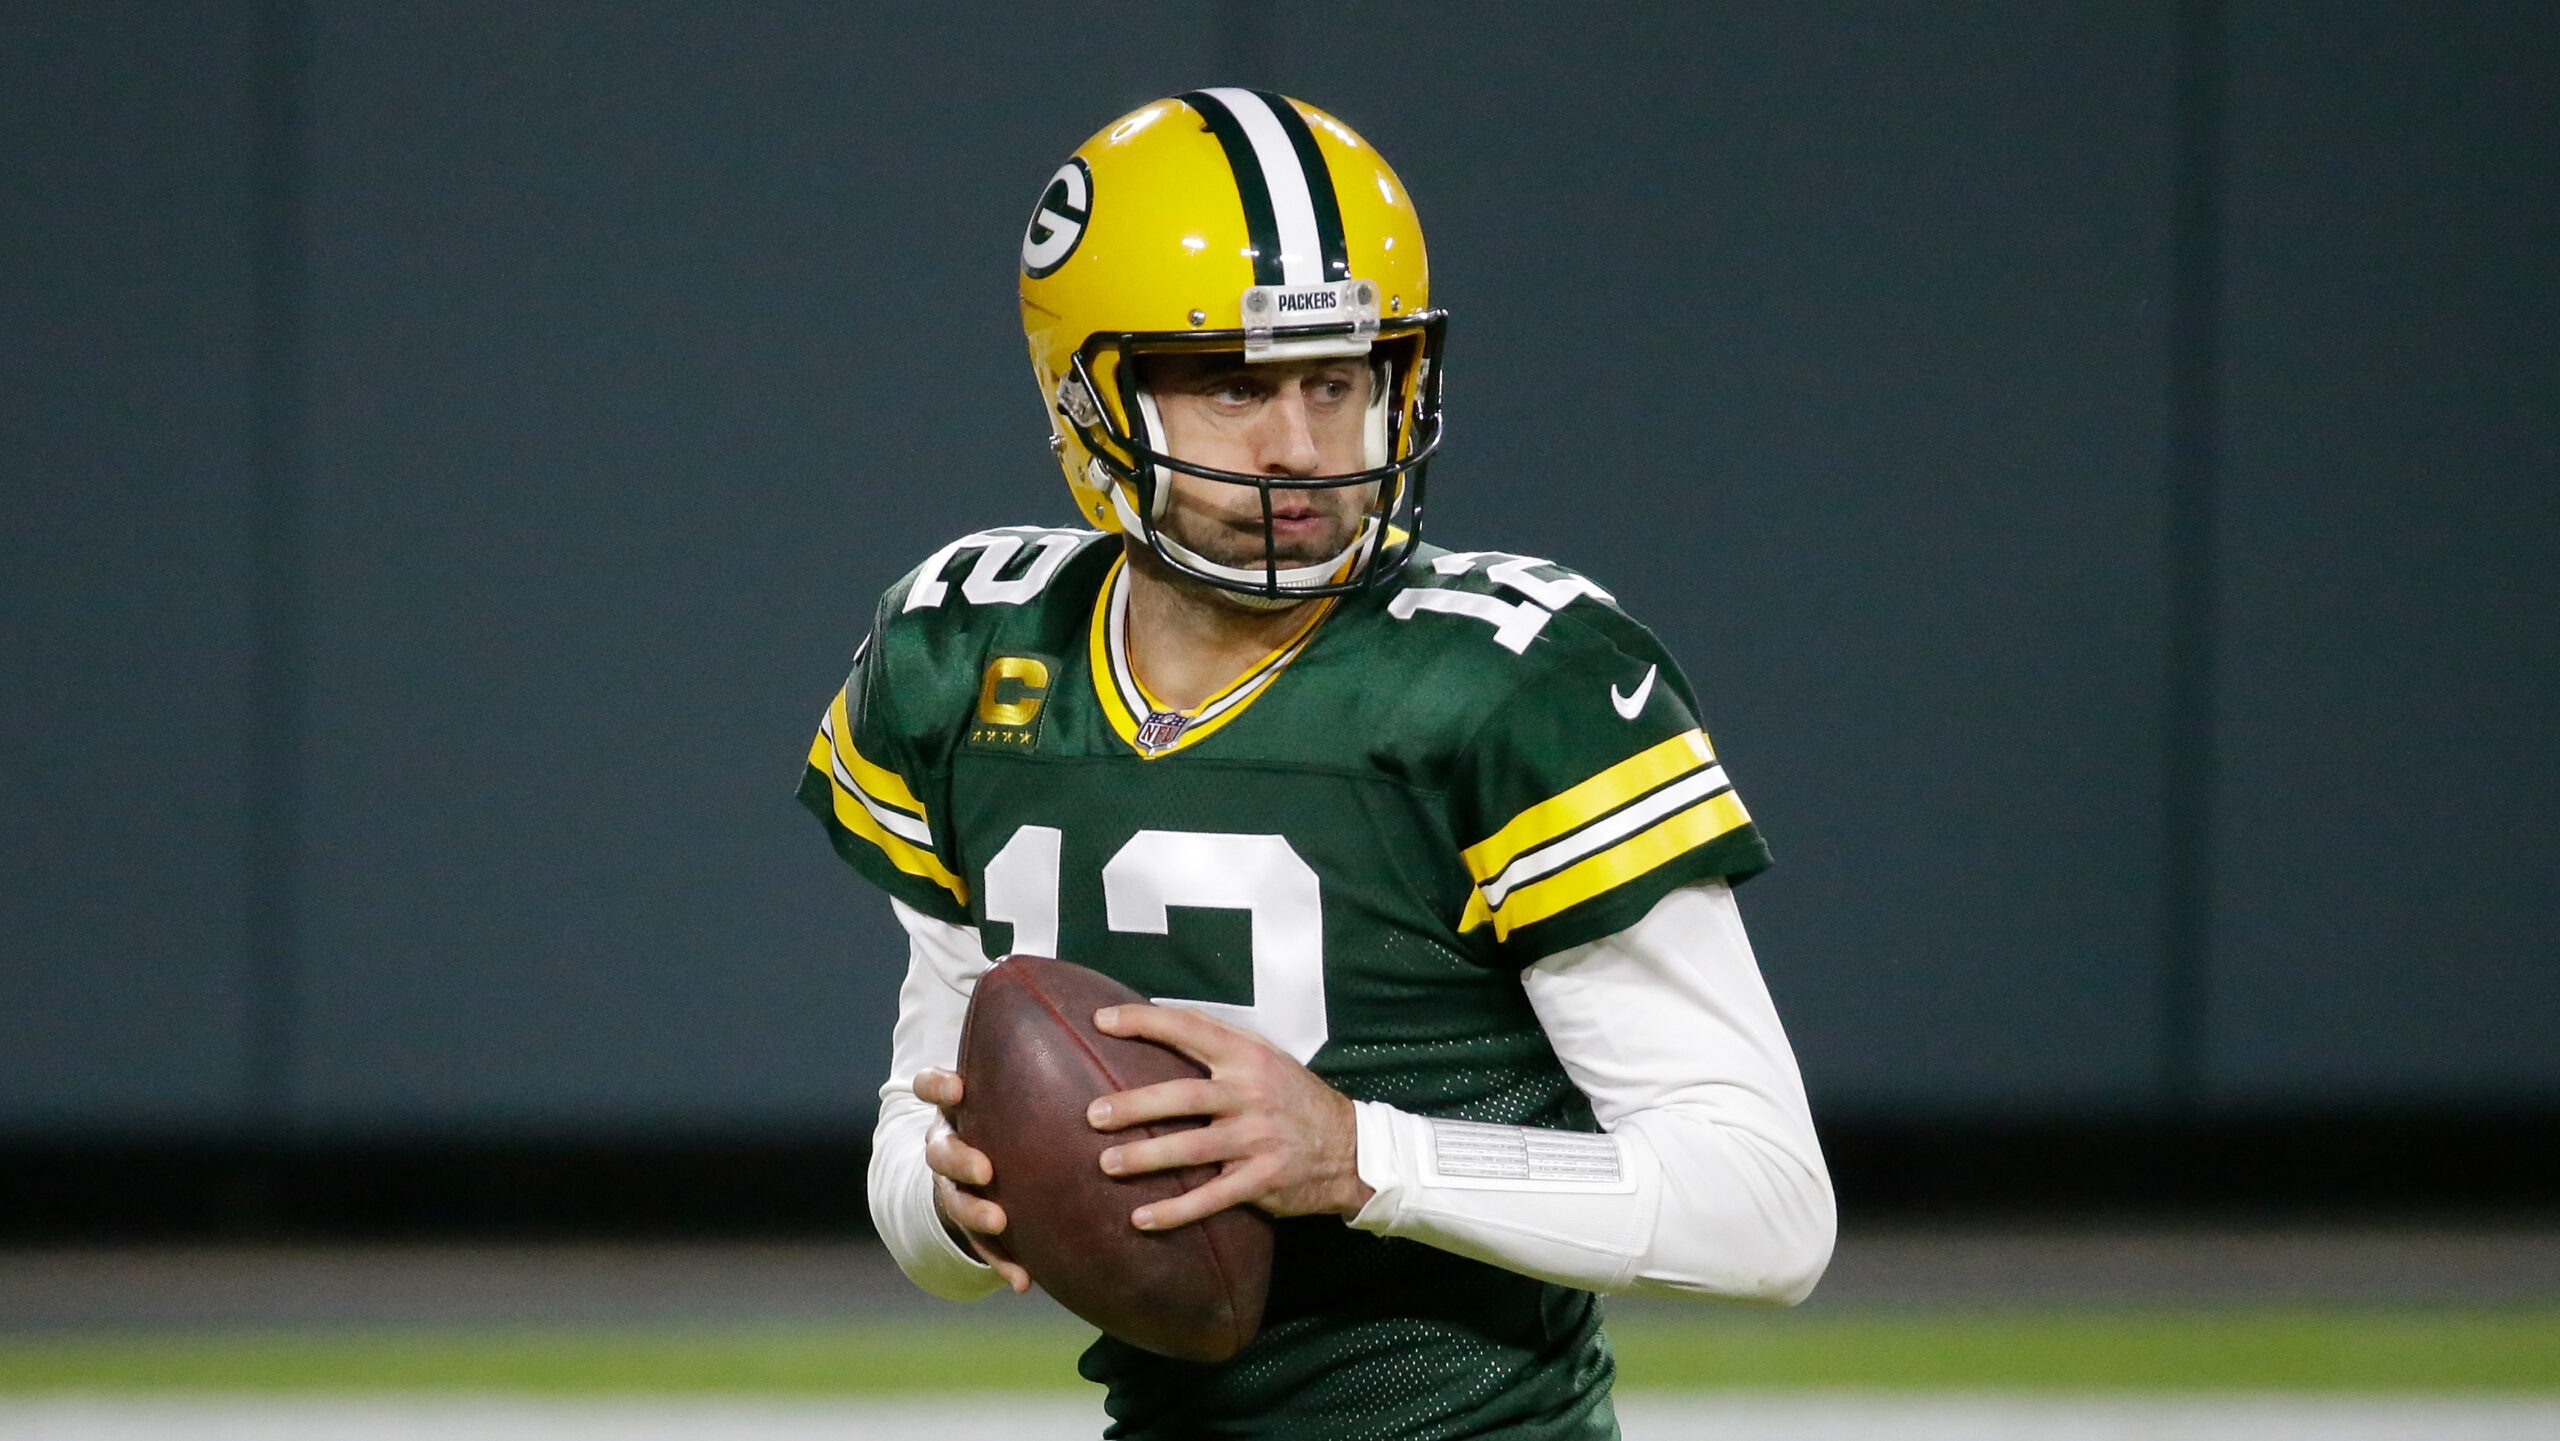 Updated: Aaron Rodgers Is ‘Immunized’ Against COVID-19 But He’s ‘Not Going To Judge’ Teammates Who Aren’t